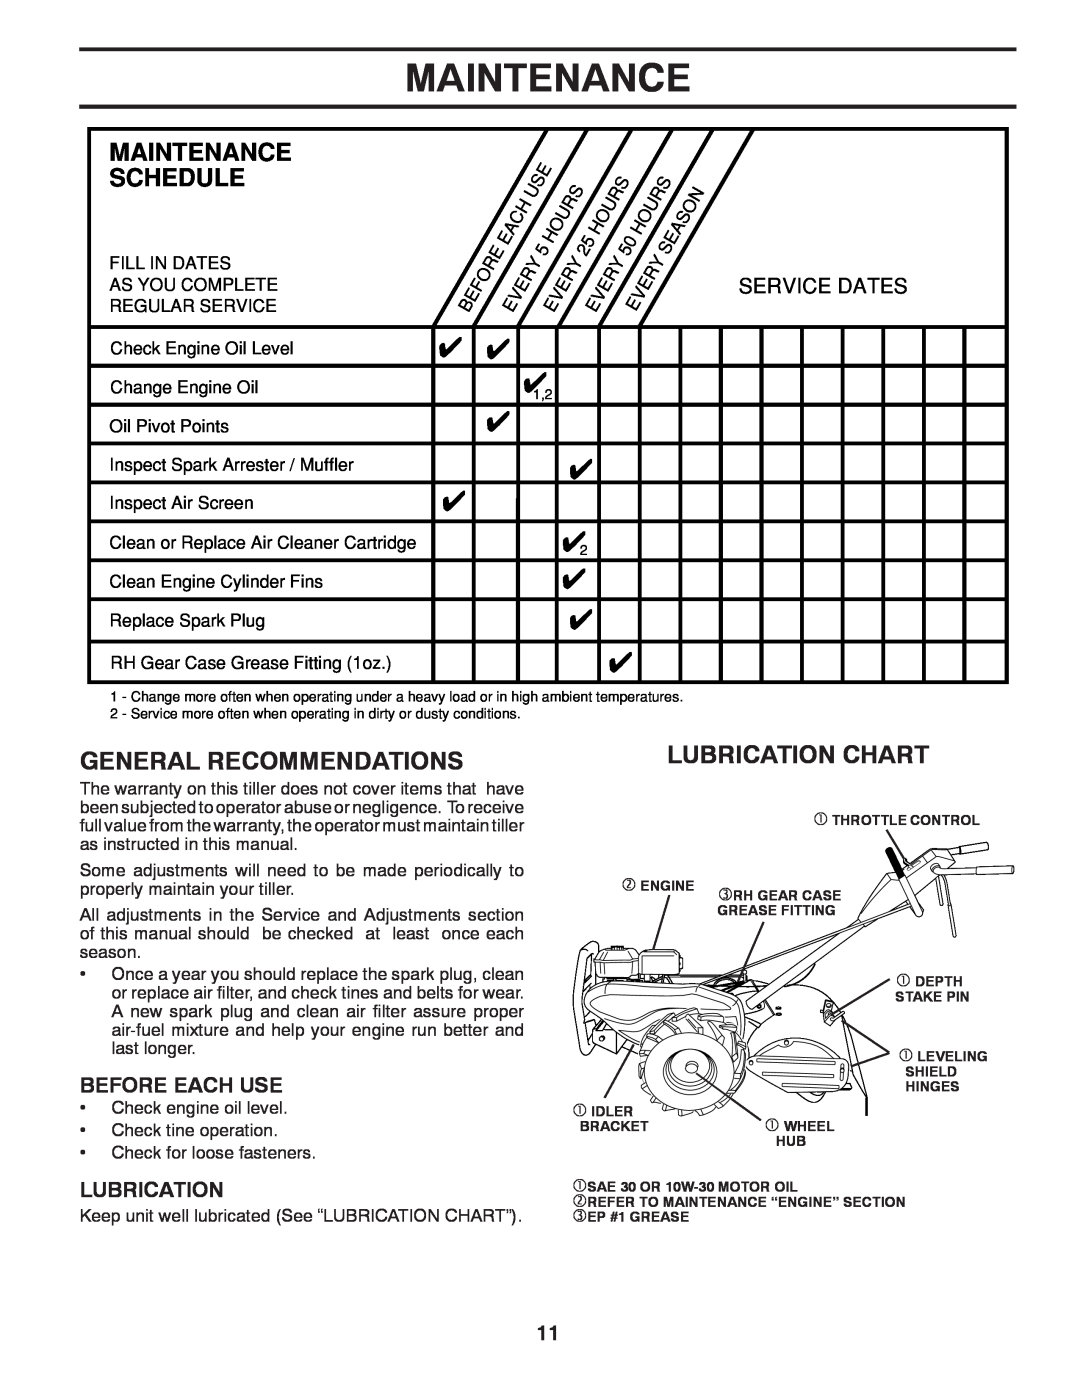 Poulan 96092001300 Maintenance Schedule, General Recommendations, Lubrication Chart, Before Each Use, Service Dates 